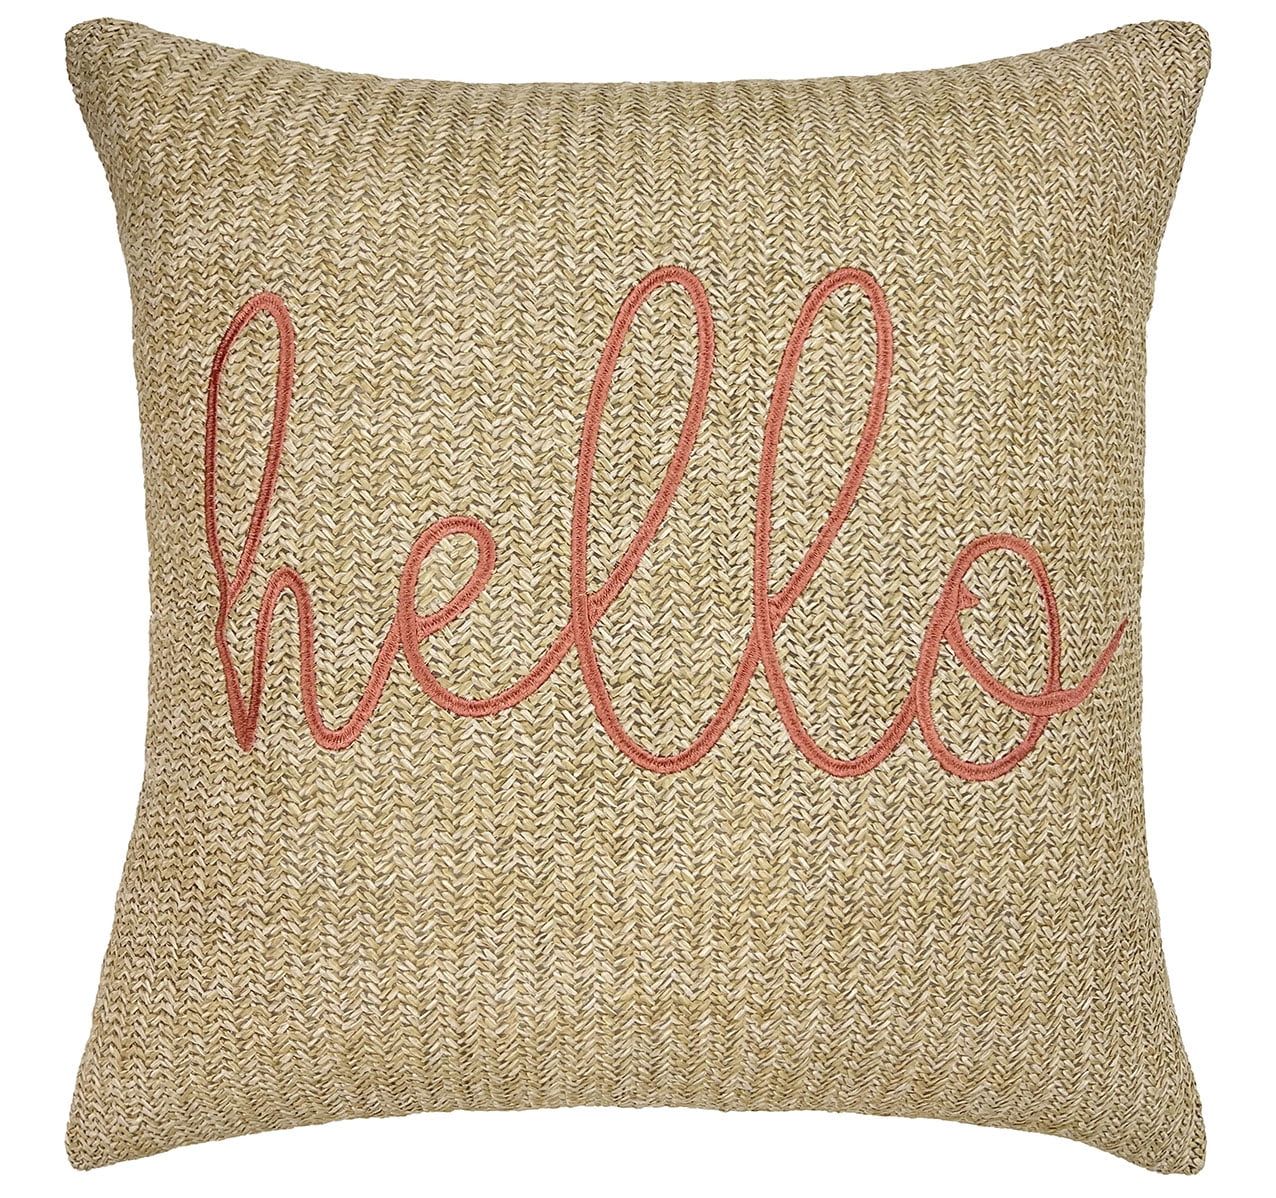 Better Homes & Garden Hello Reversible Tropical Outdoor Pillow with Satin Embroidery, 19" x 19", ... | Walmart (US)